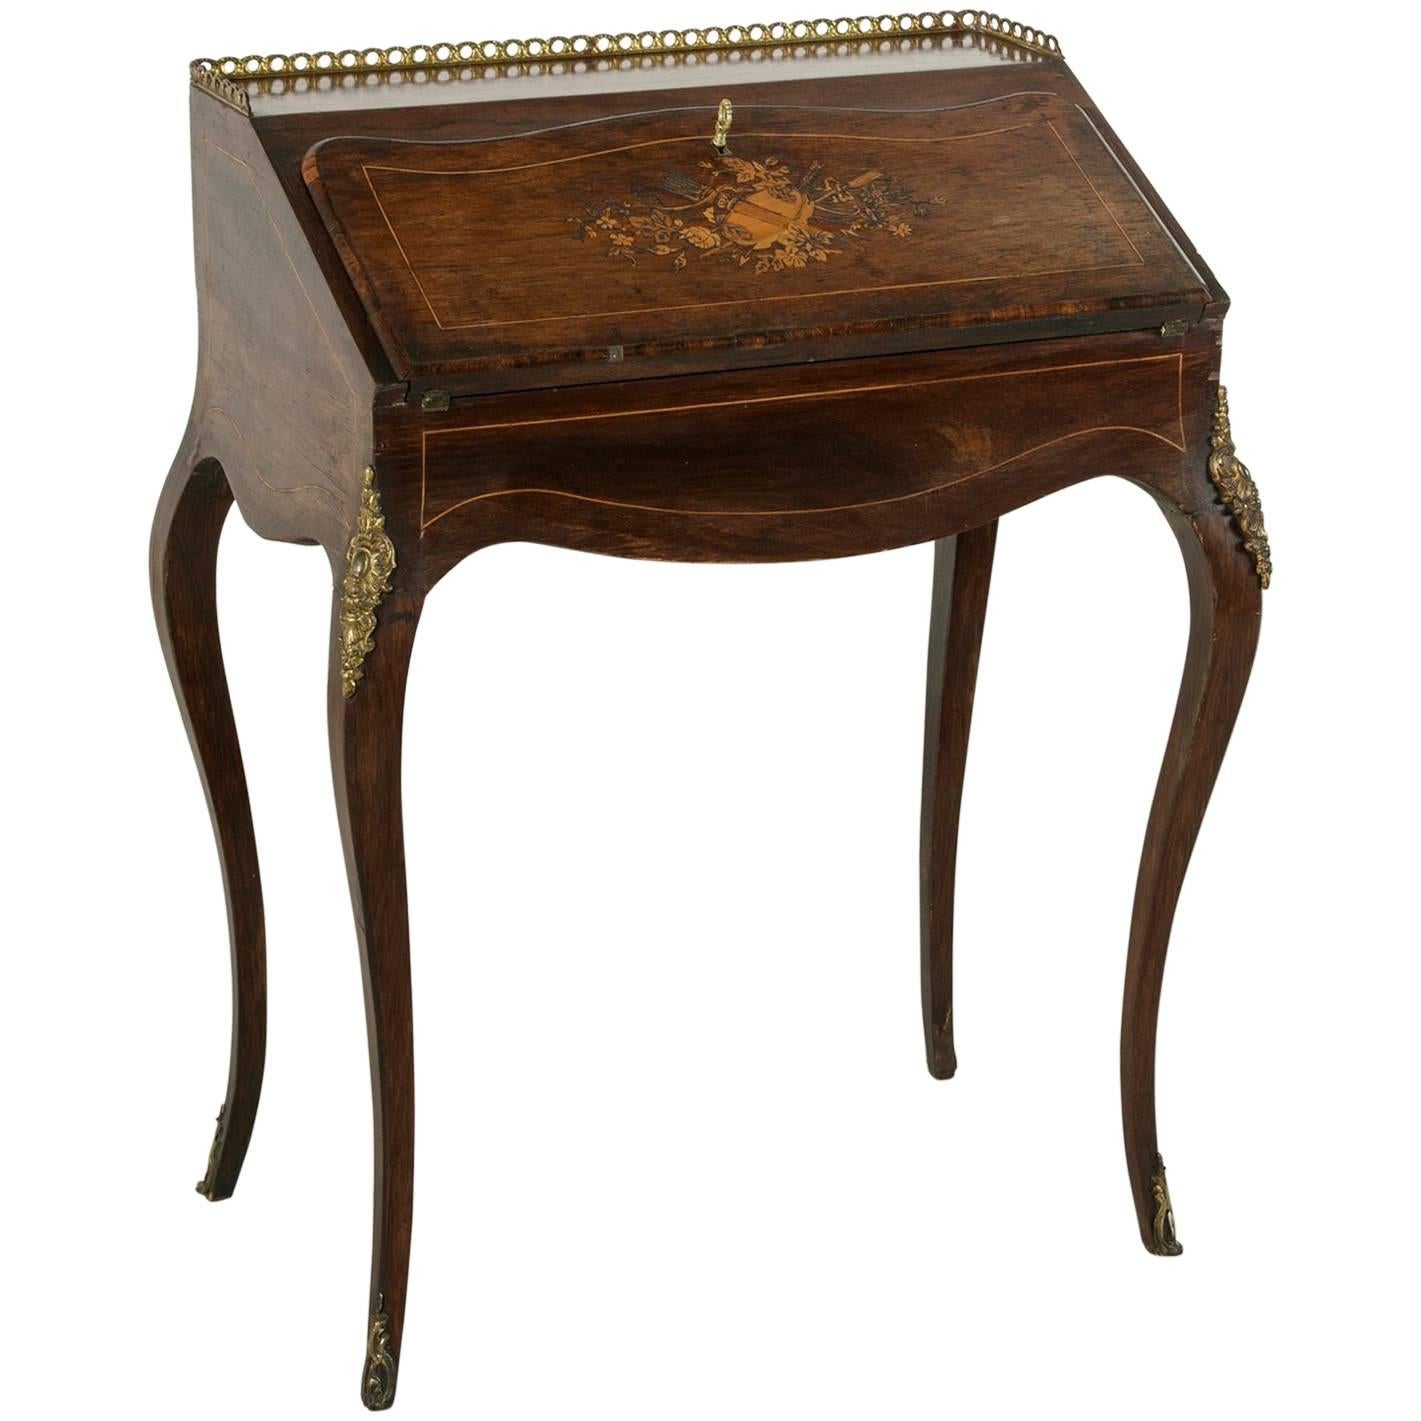 19th Century French Napoleon III Period Lady's Desk with Inlay and Bronze Ormolu